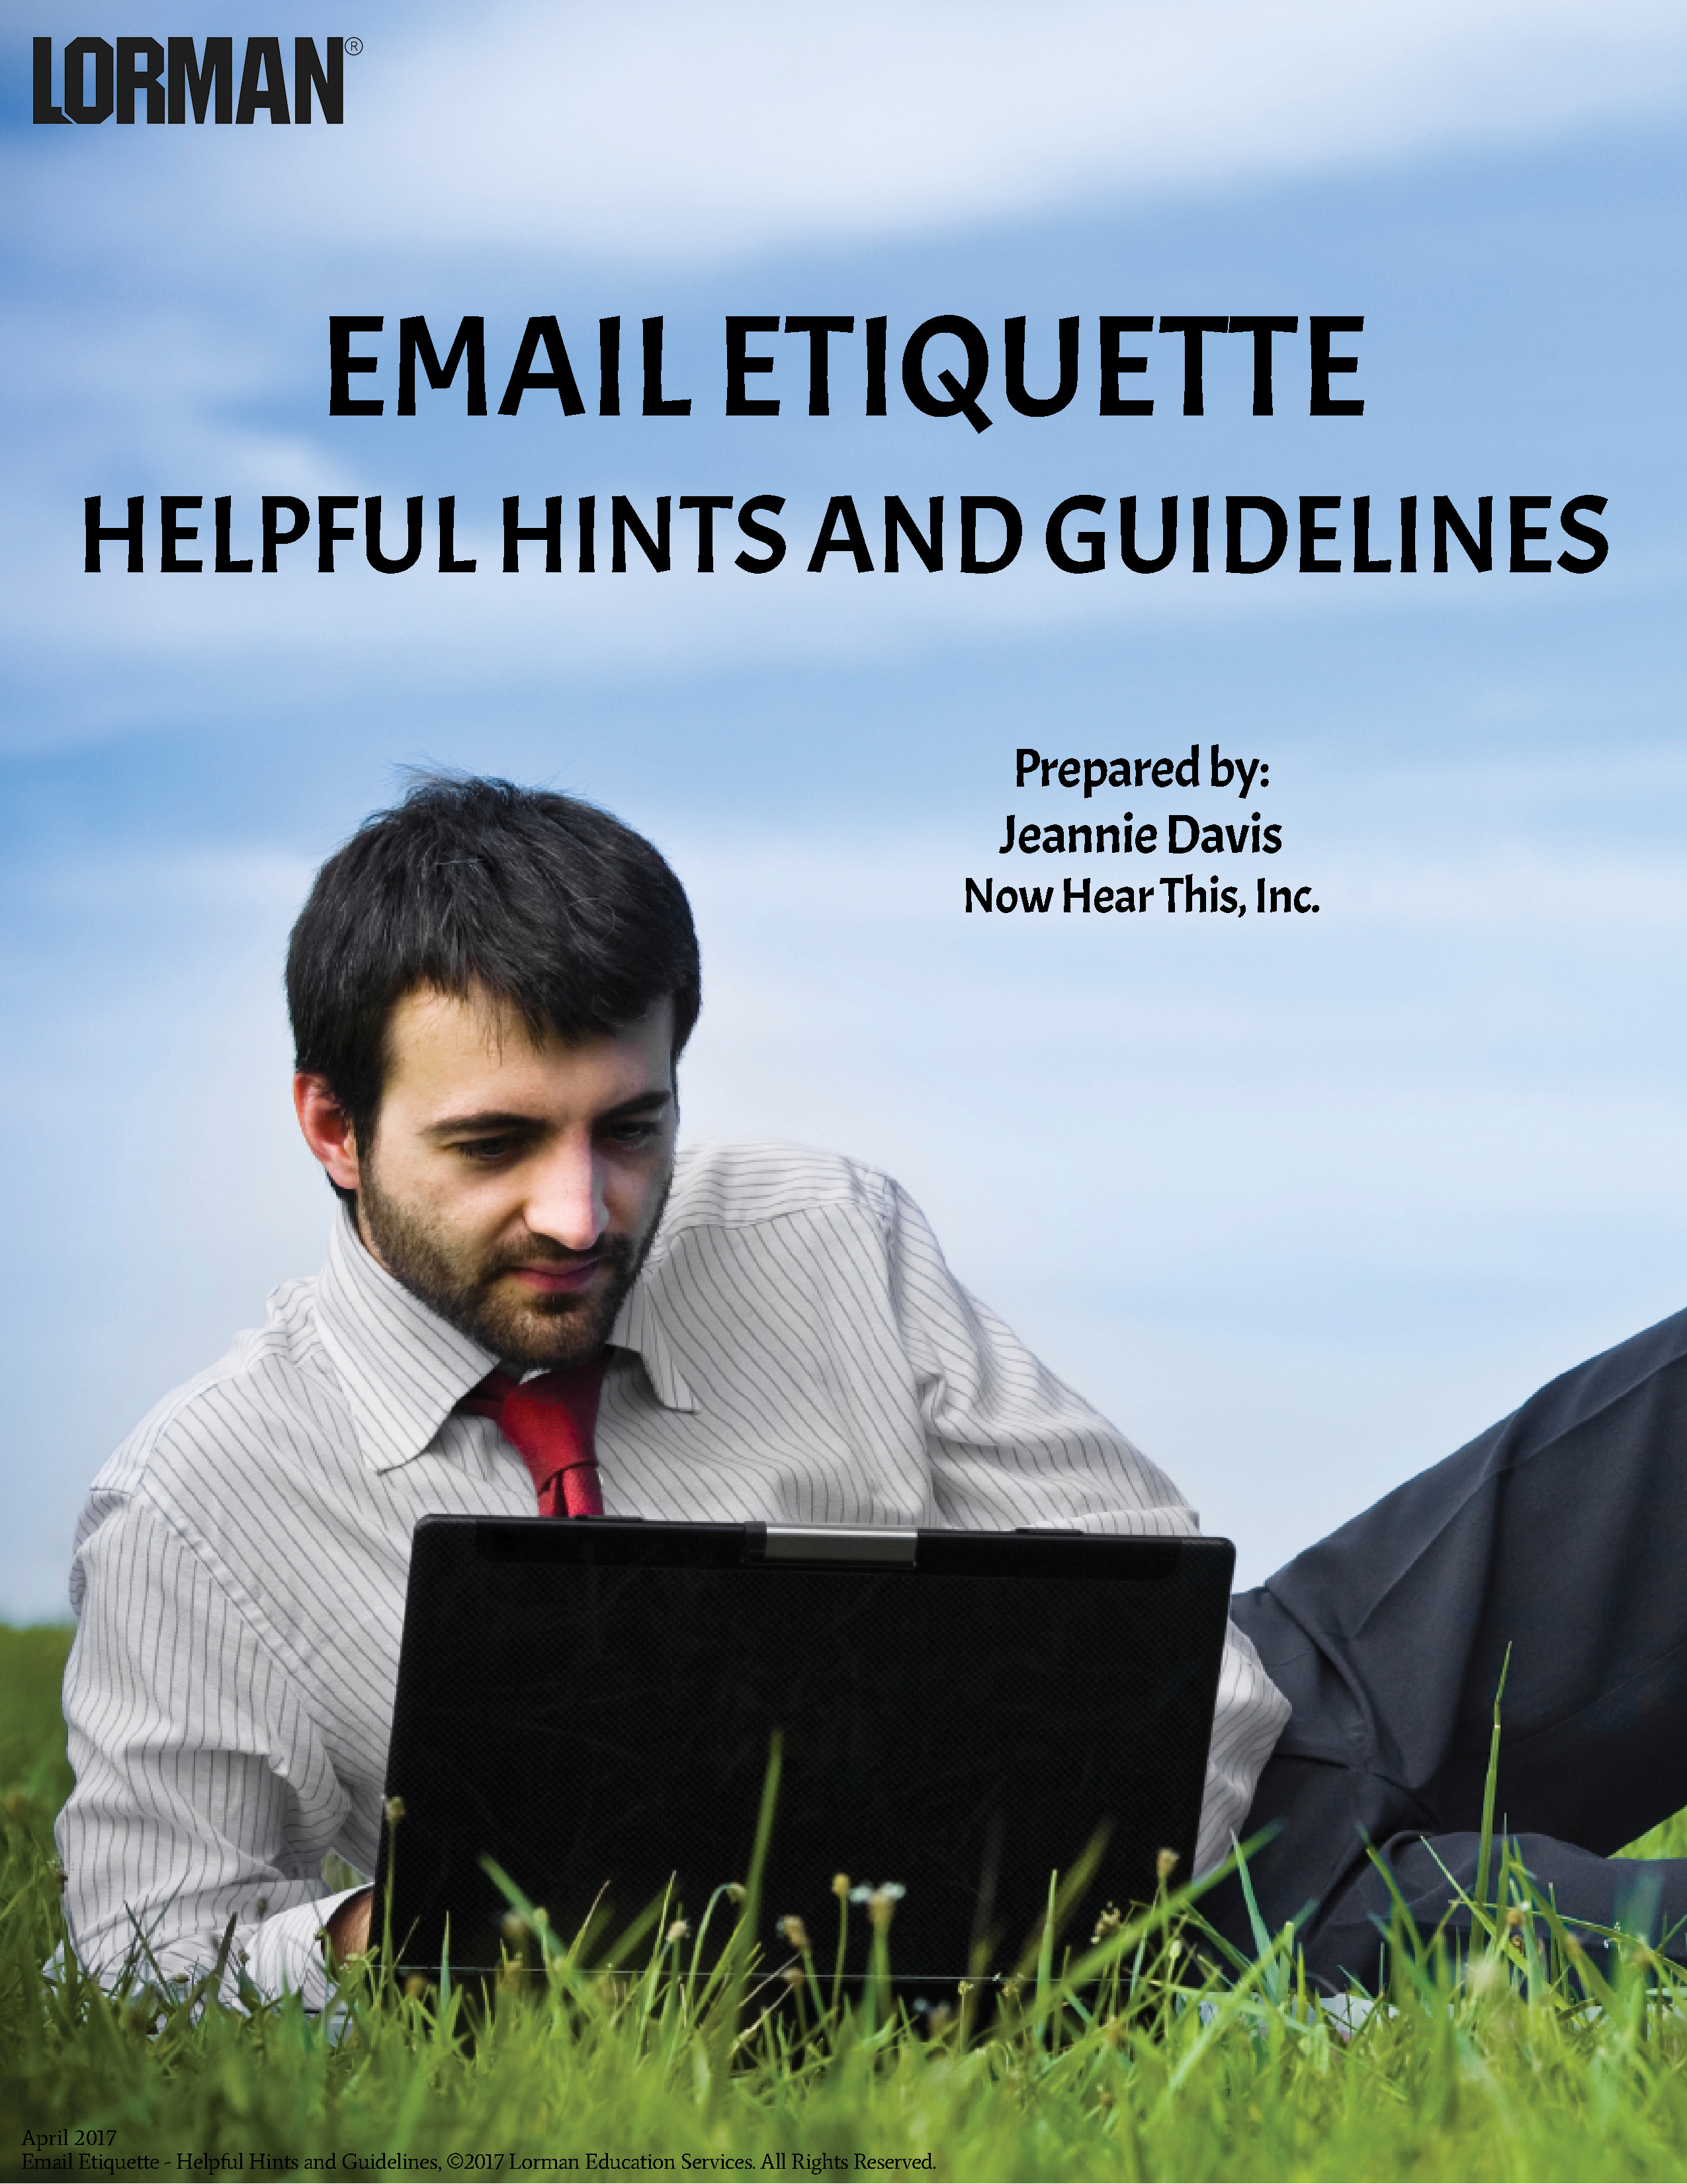 Email Etiquette - Helpful Hints and Guidelines